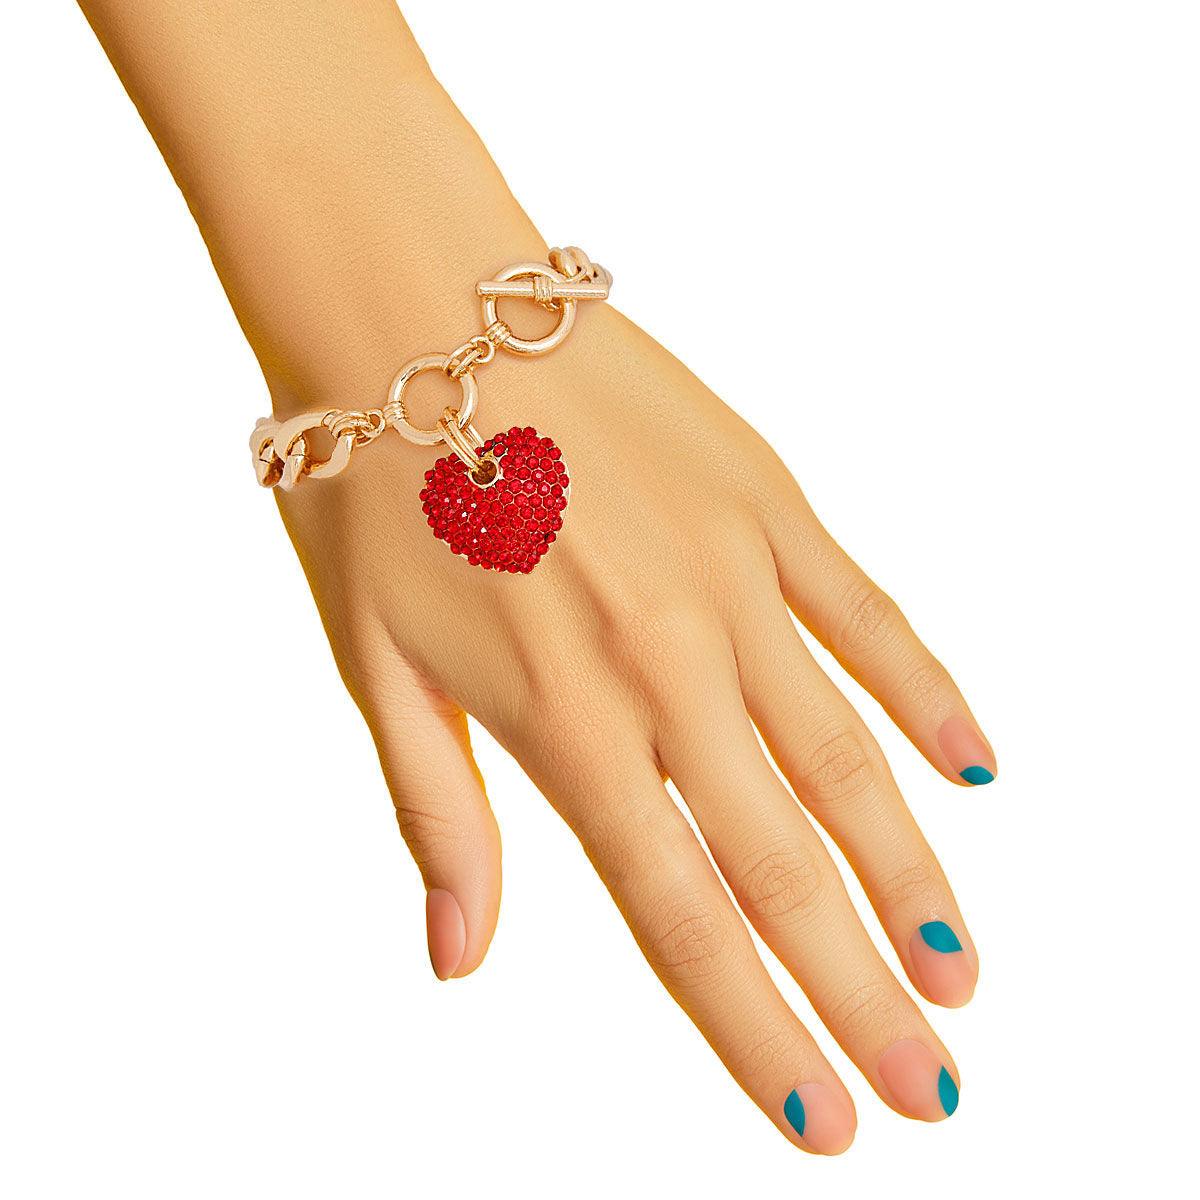 Yellow Gold Plated Link Chain Bracelet Red Heart Charm